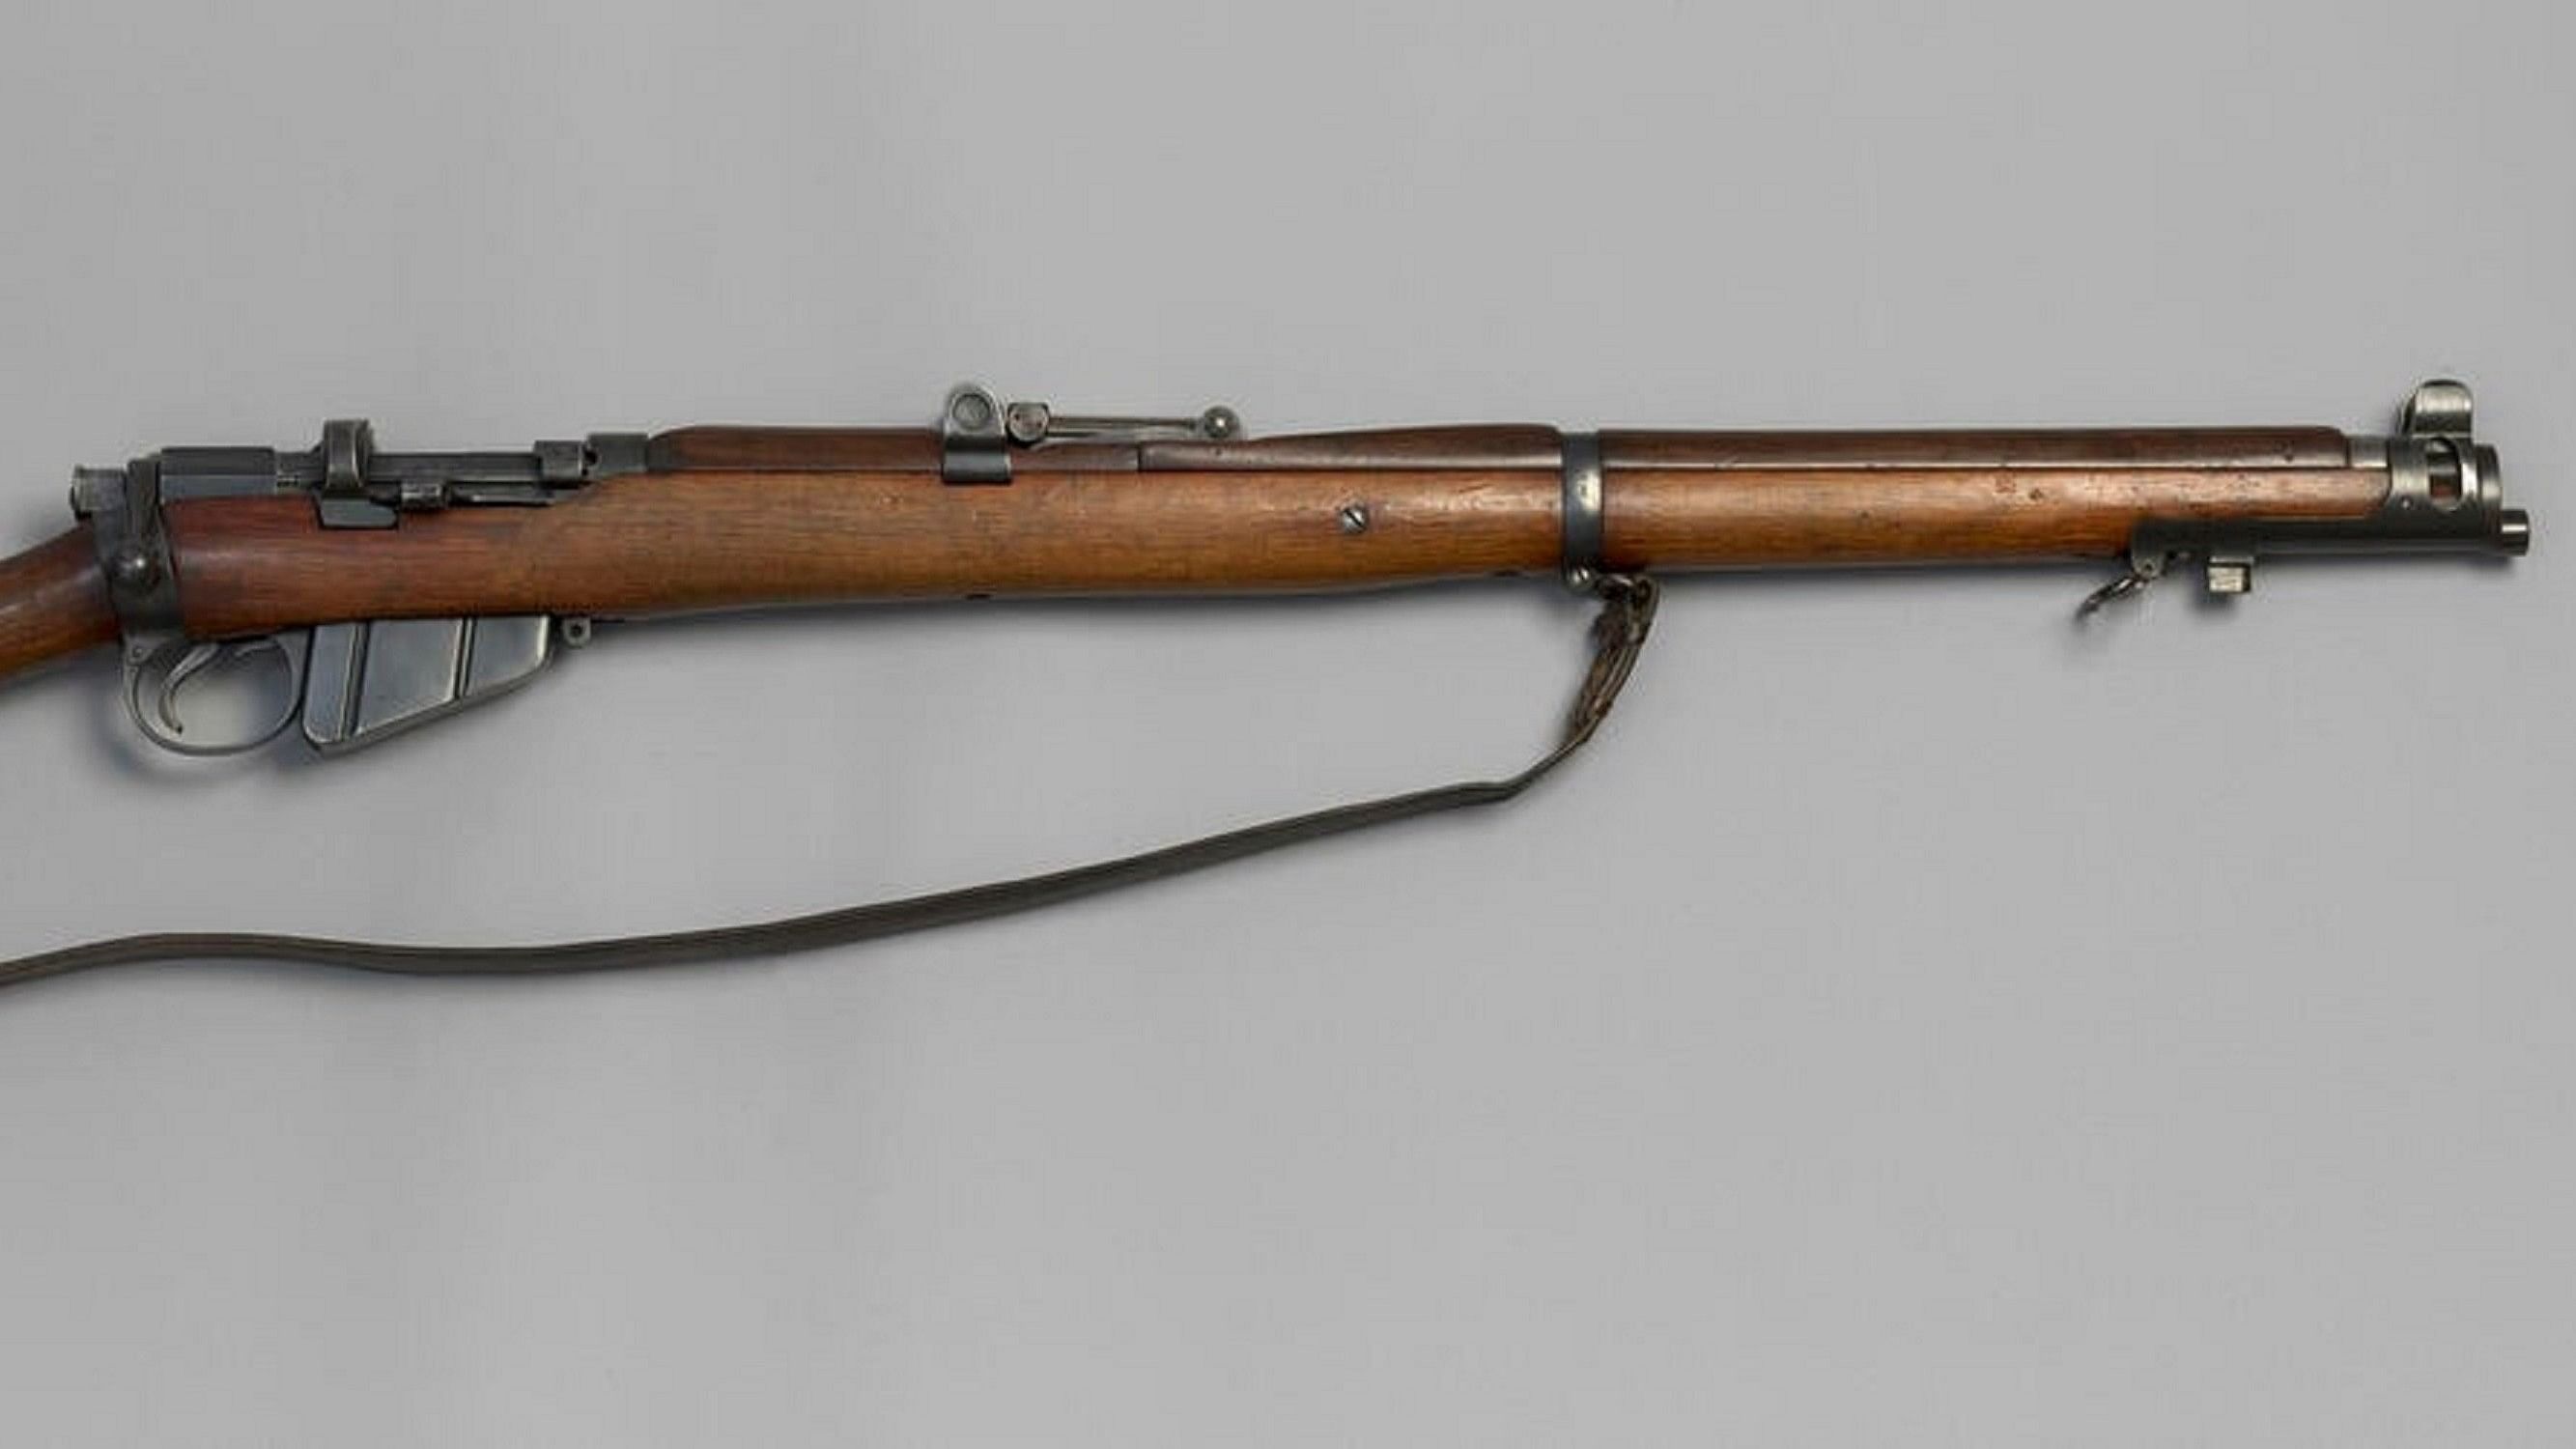 <div class="paragraphs"><p>This SMLE Mk III model rifle, a popular variant of the Lee-Enfield rifle, was used at Gallipoli&nbsp;where it was&nbsp;captured by the Turks. Military officer Enver Pasha&nbsp;of Turkey&nbsp;presented it&nbsp;to Emir Faisal&nbsp;(who later became the King of Iraq), who&nbsp;presented it&nbsp;to Colonel T E Lawrence.</p></div>